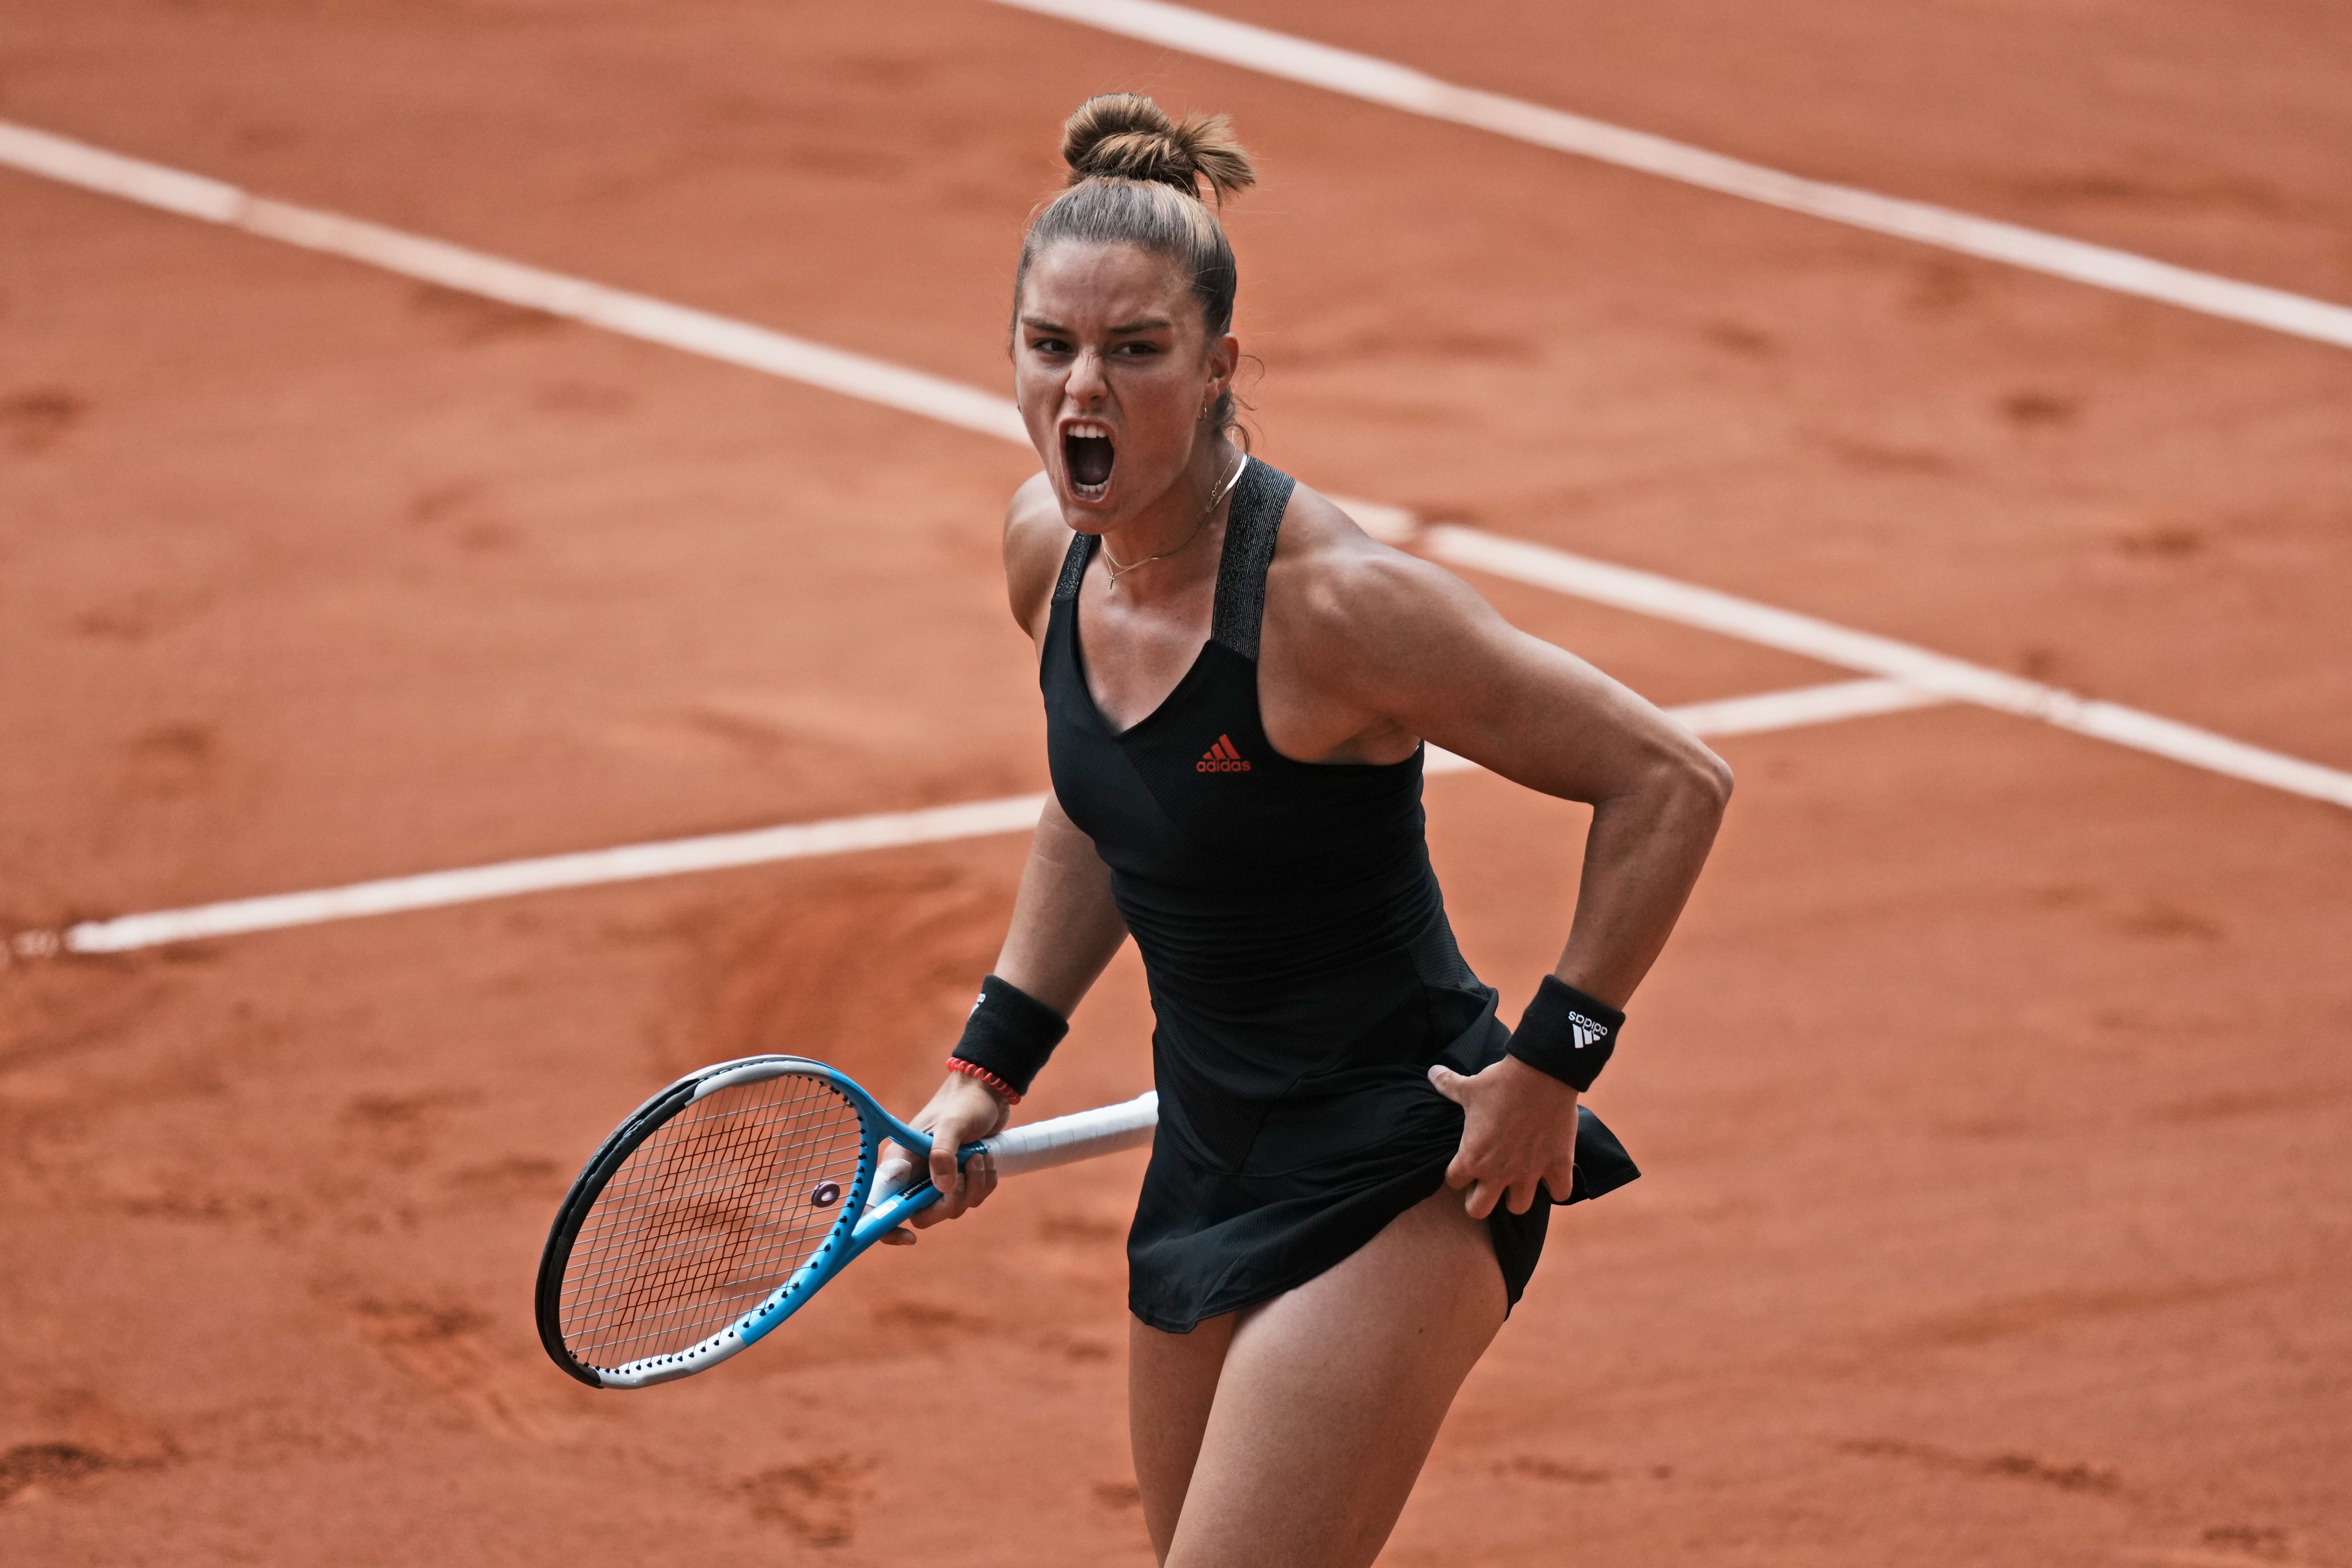 French Open semifinals free live stream (6/10/21) How to watch womens singles, time, channel